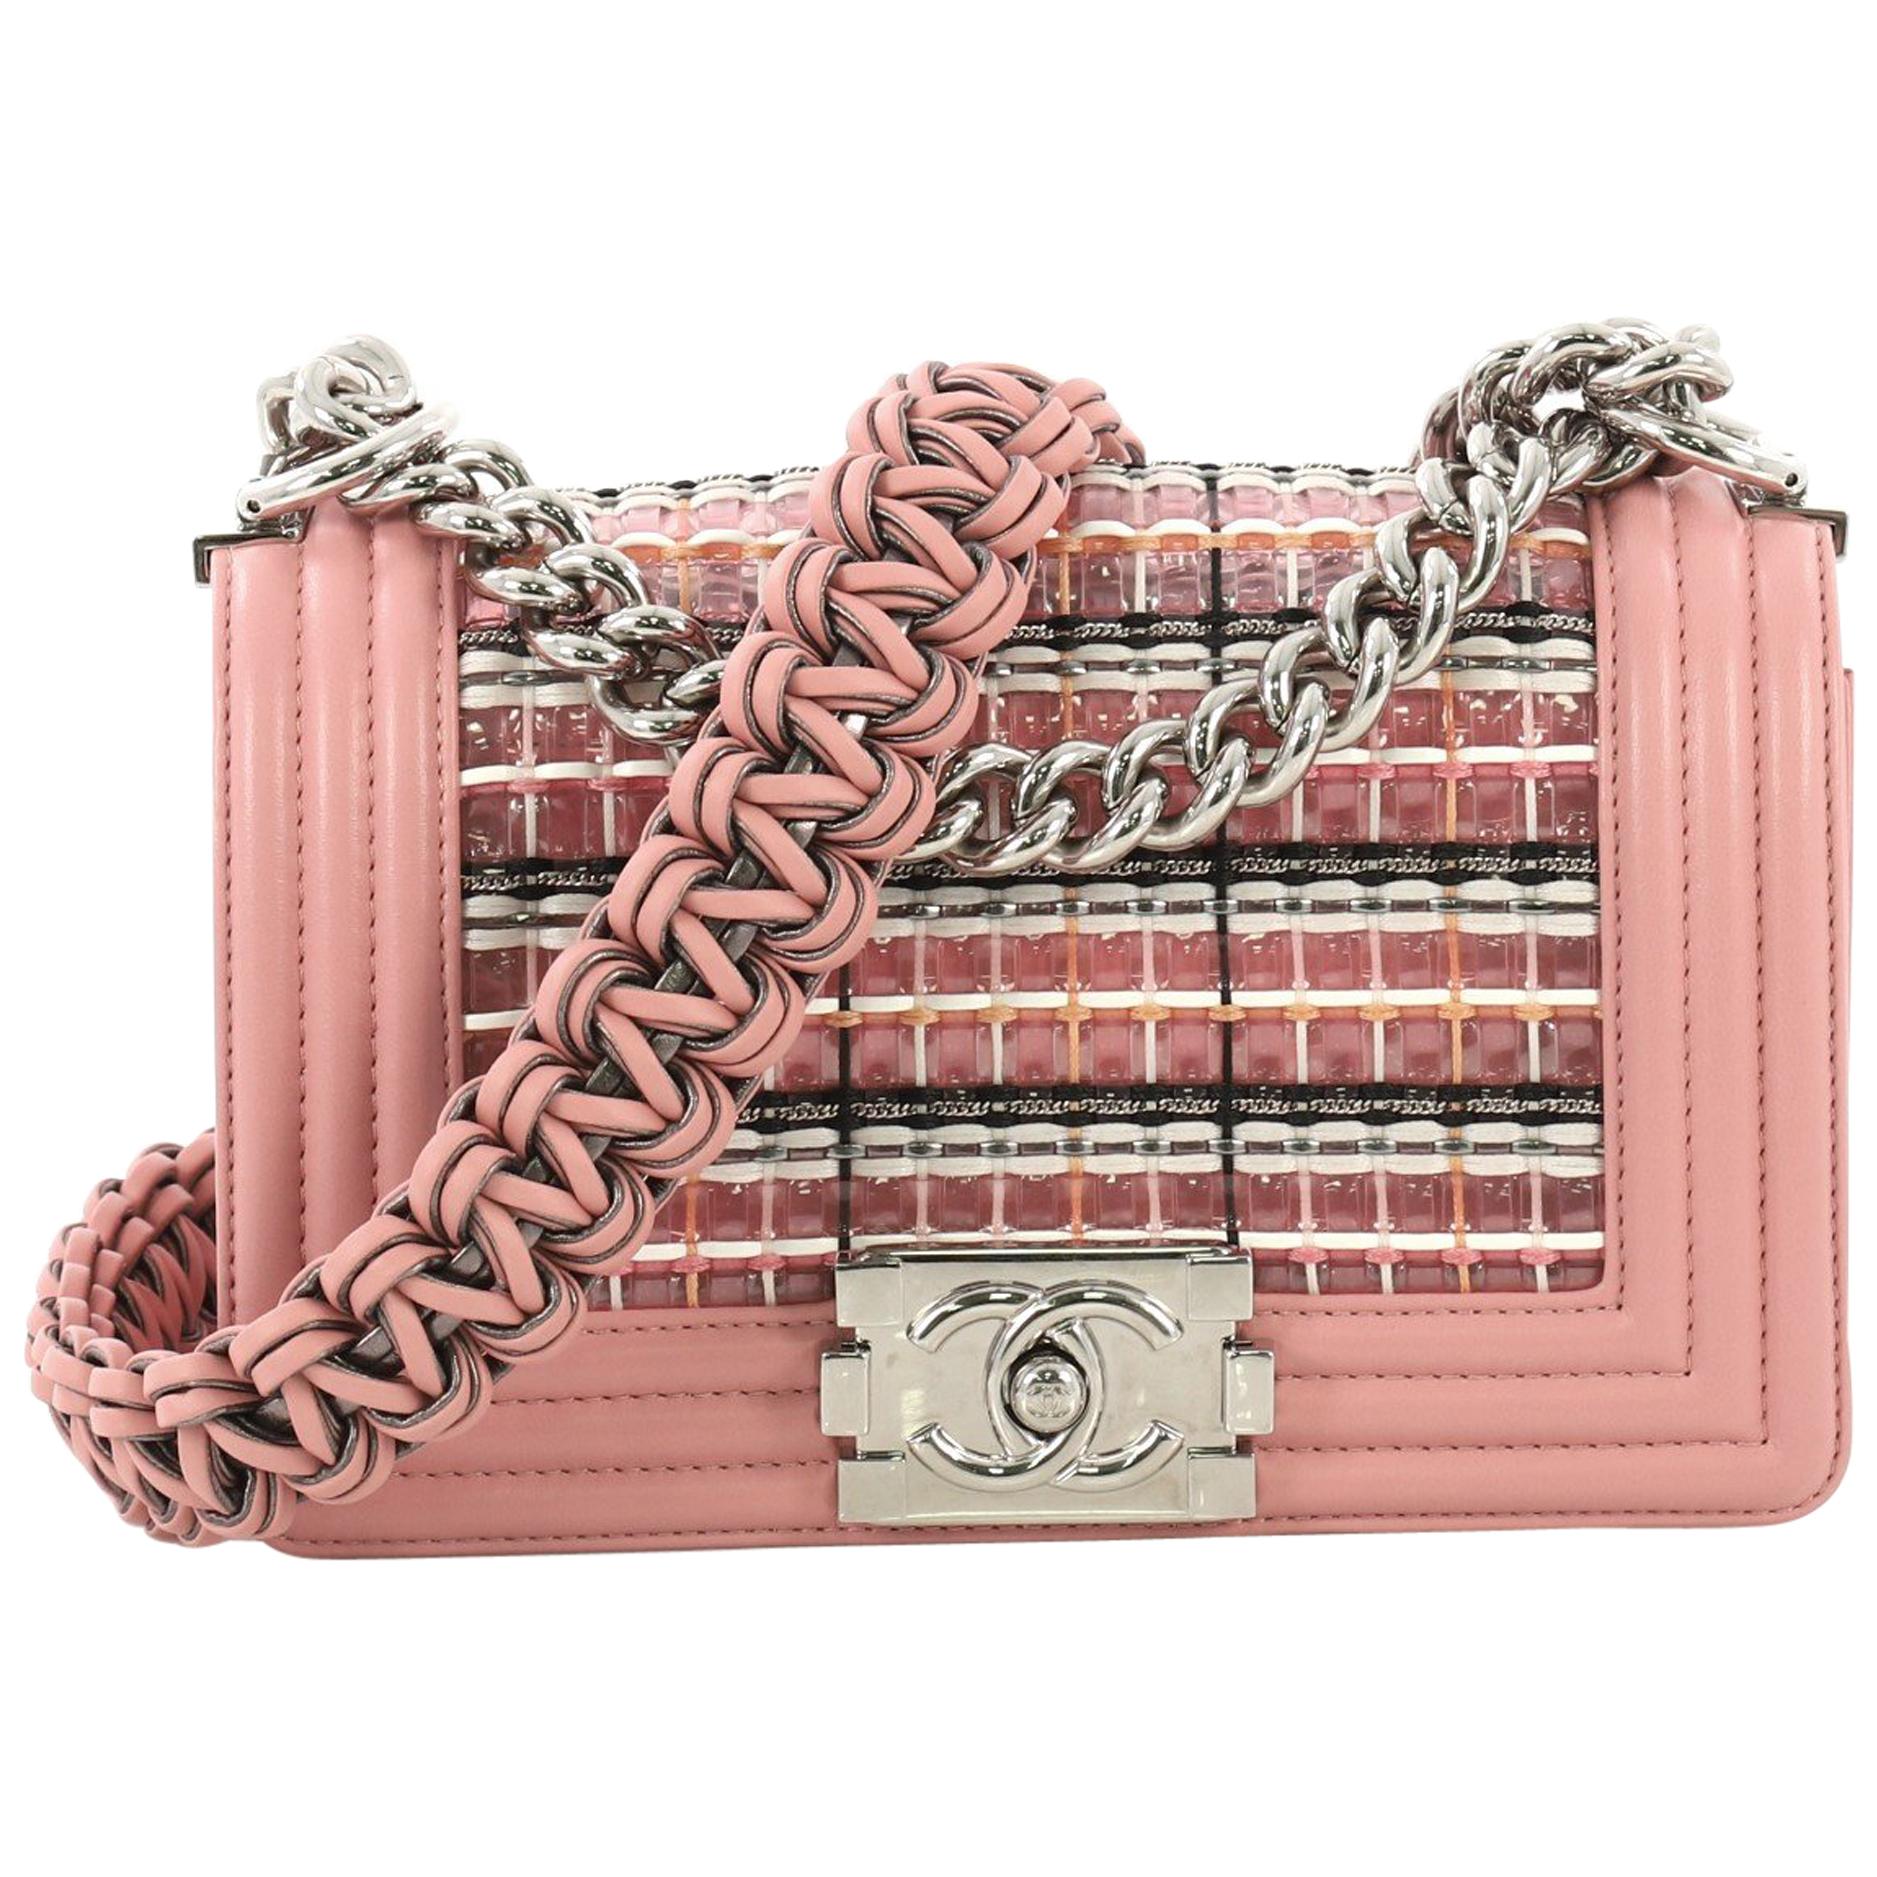 Chanel Boy Flap Bag Woven PVC with Lambskin Small